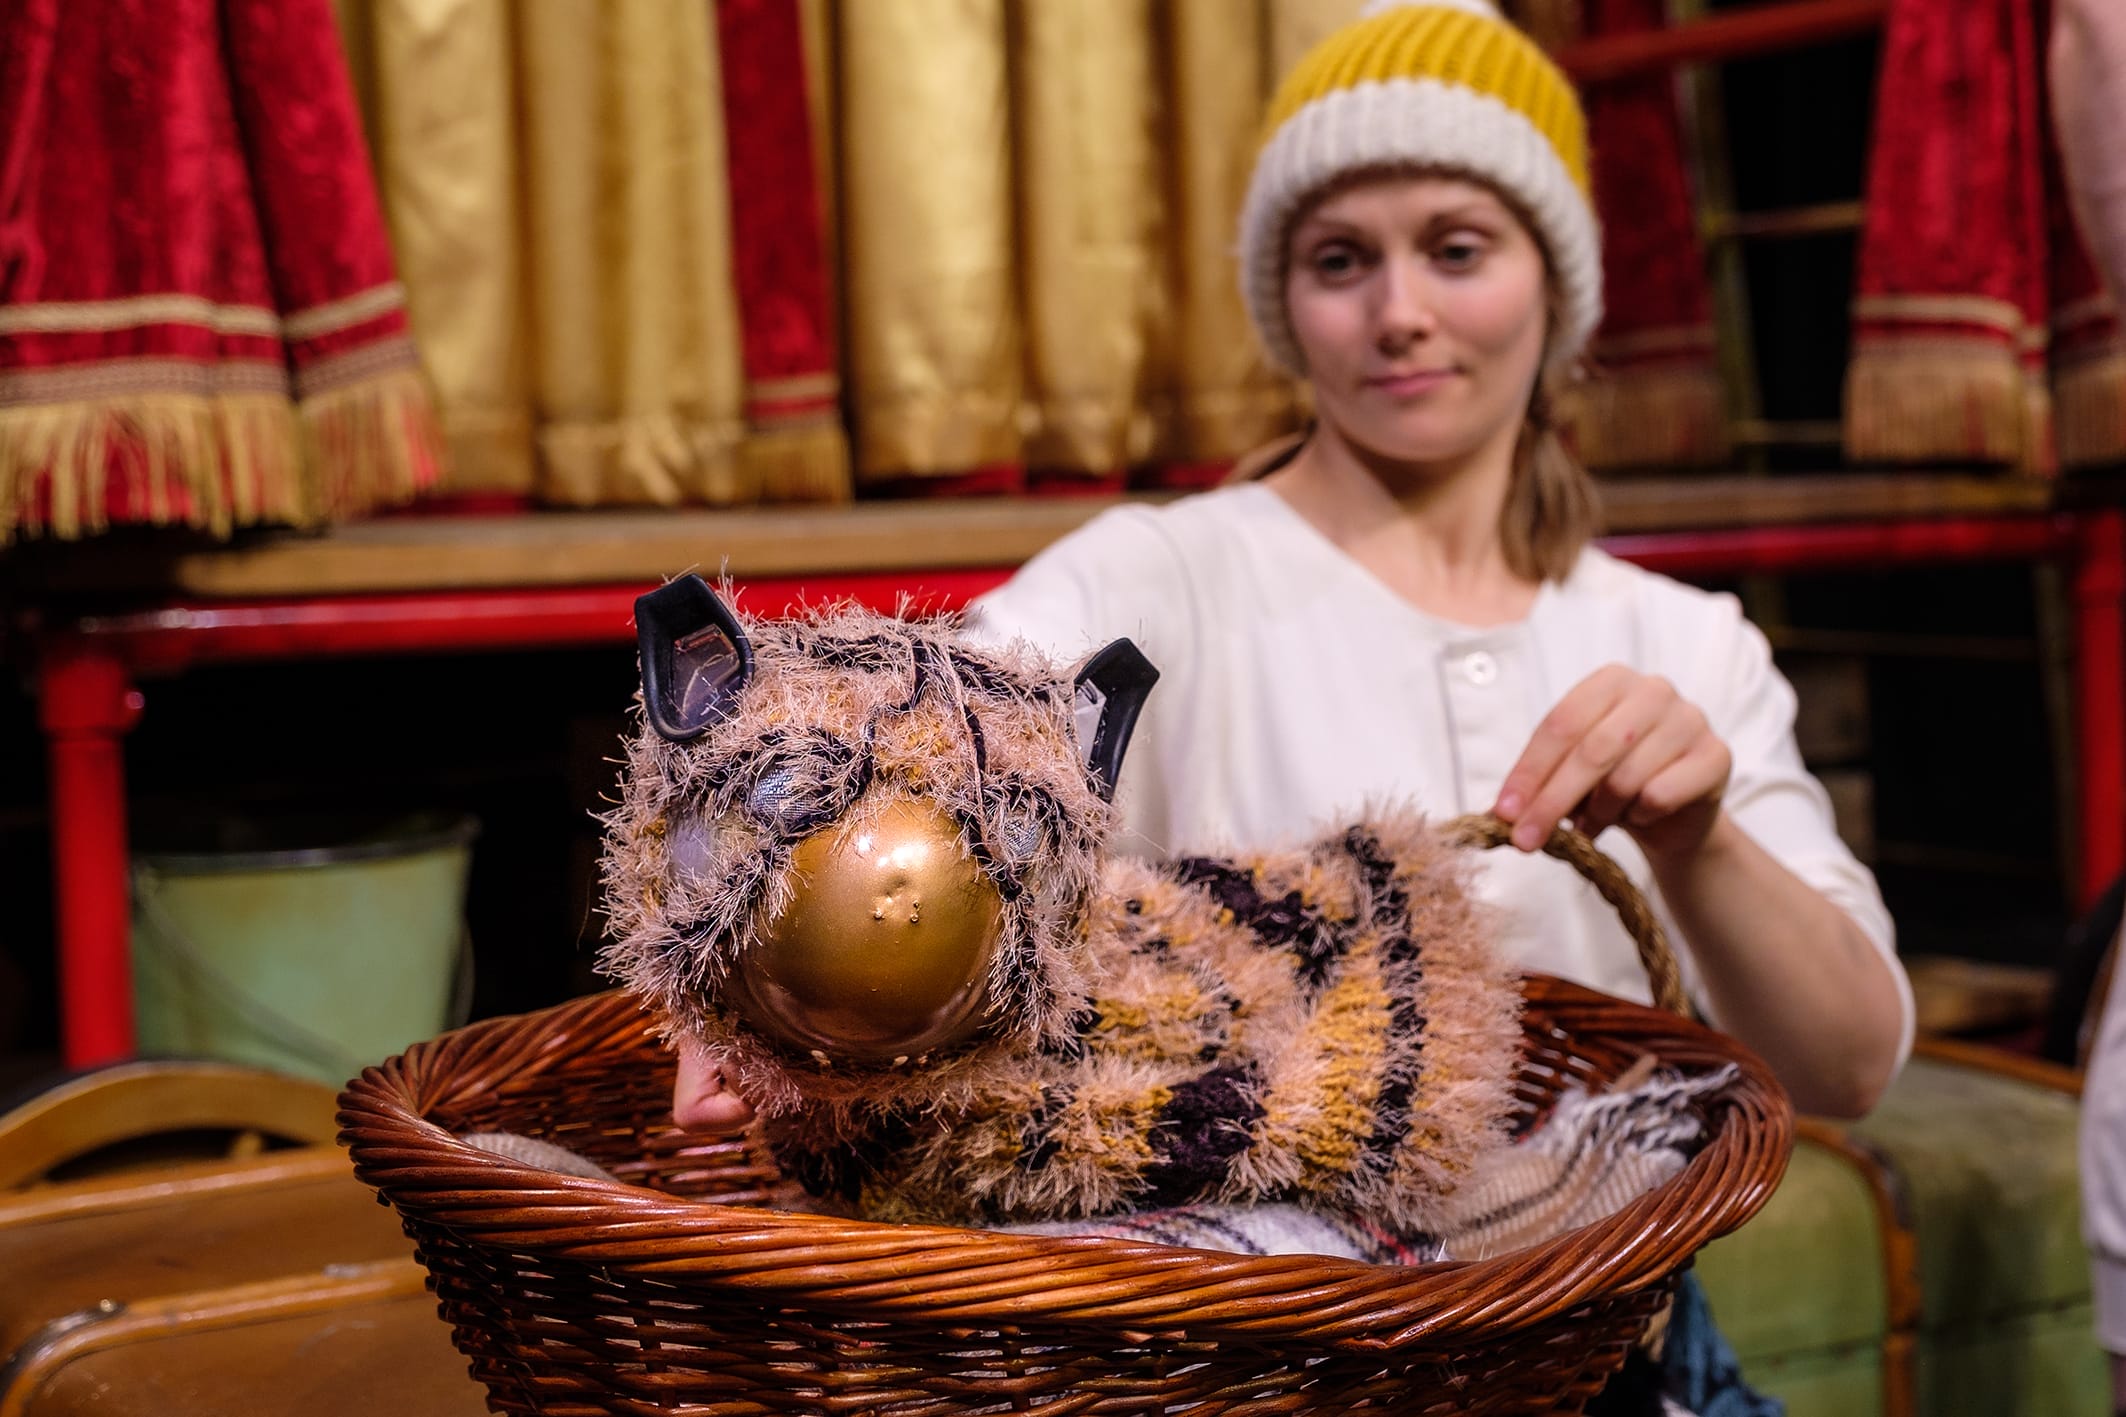 A tiger puppet sits in a wicker basket, with a lady behind in a white top and yellow and grey bobble hat.